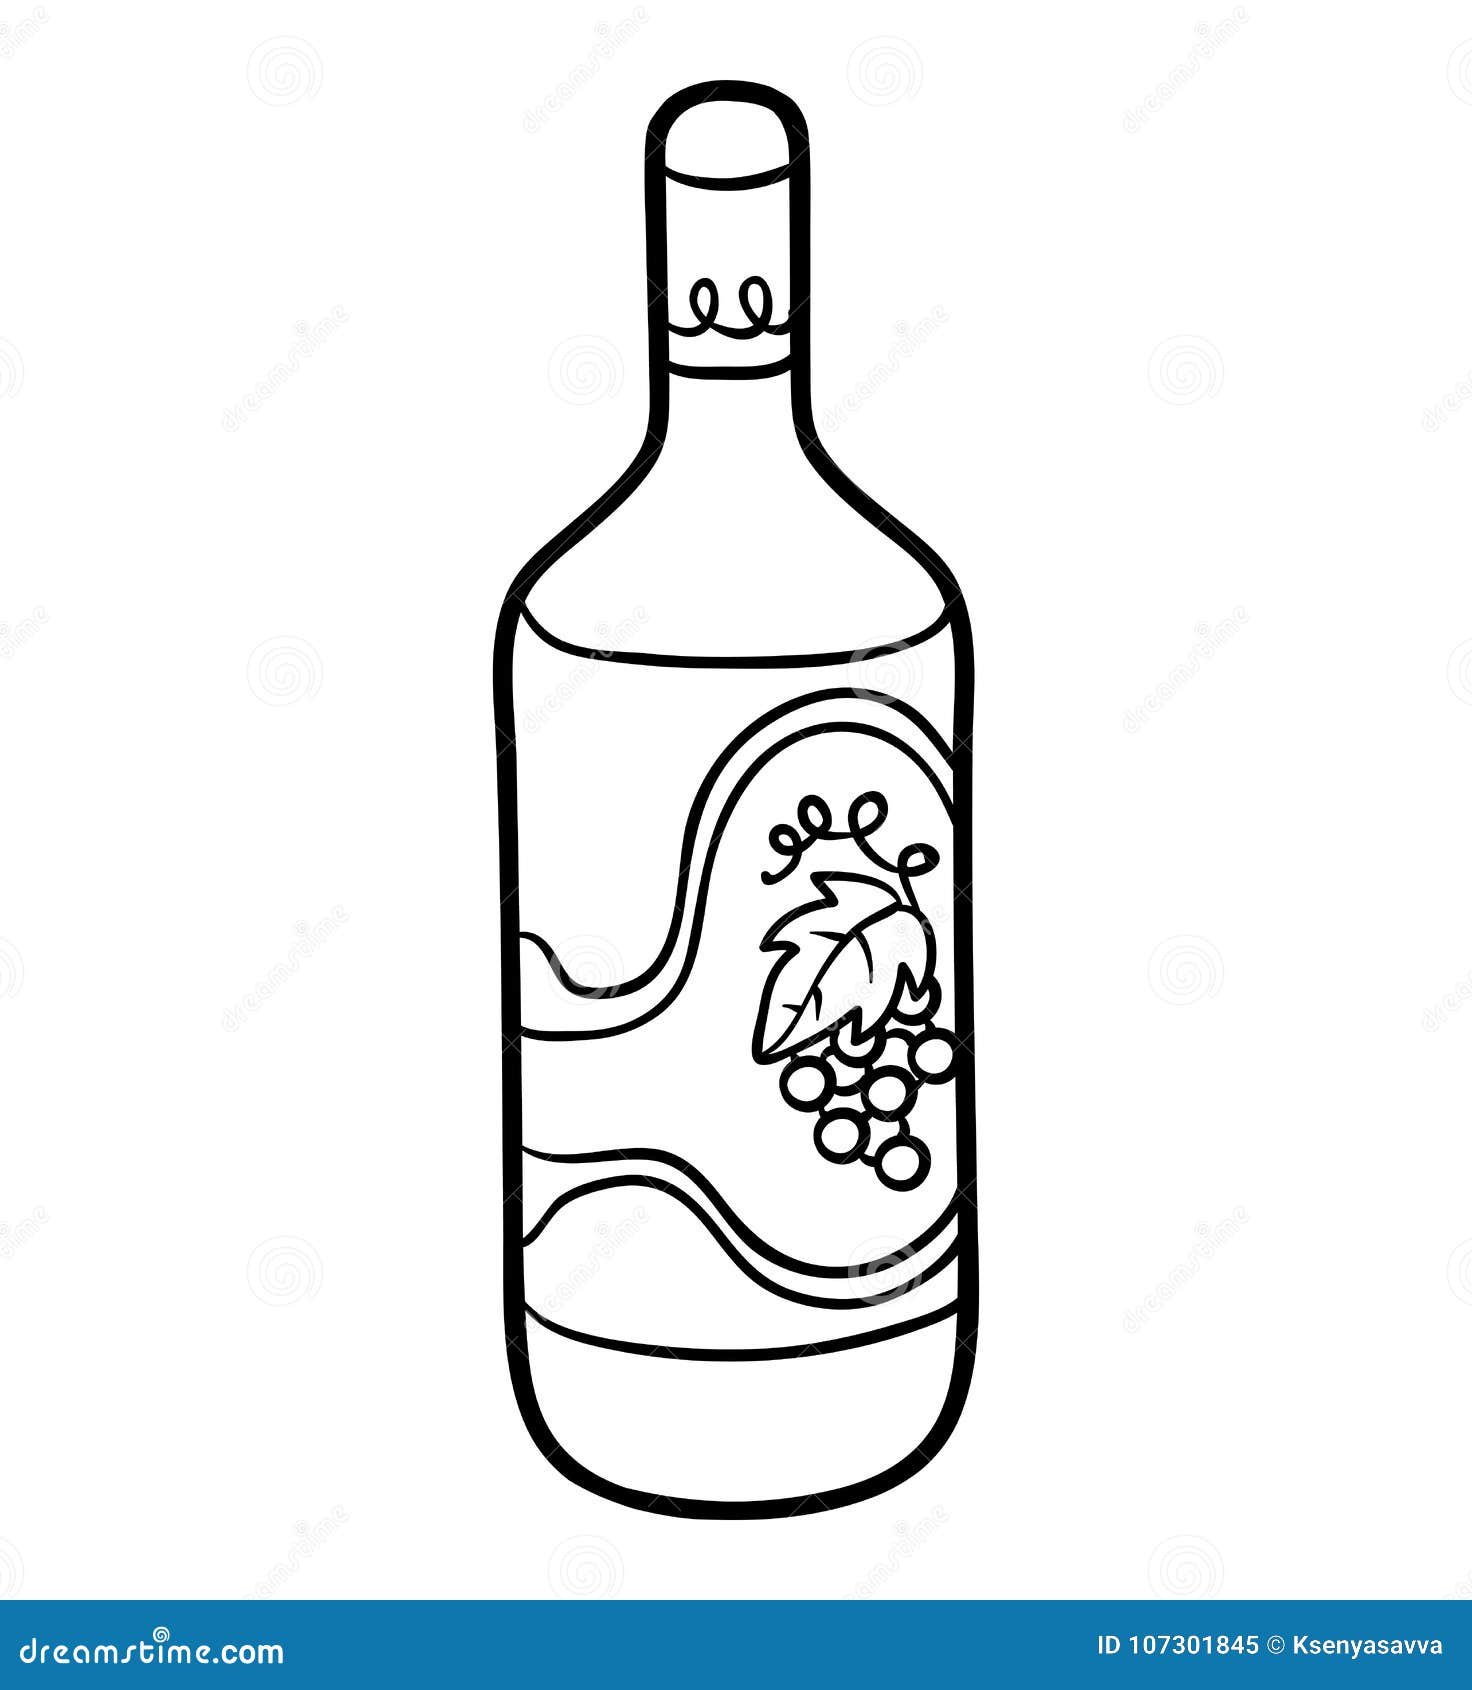 Coloring book bottle of wine stock vector